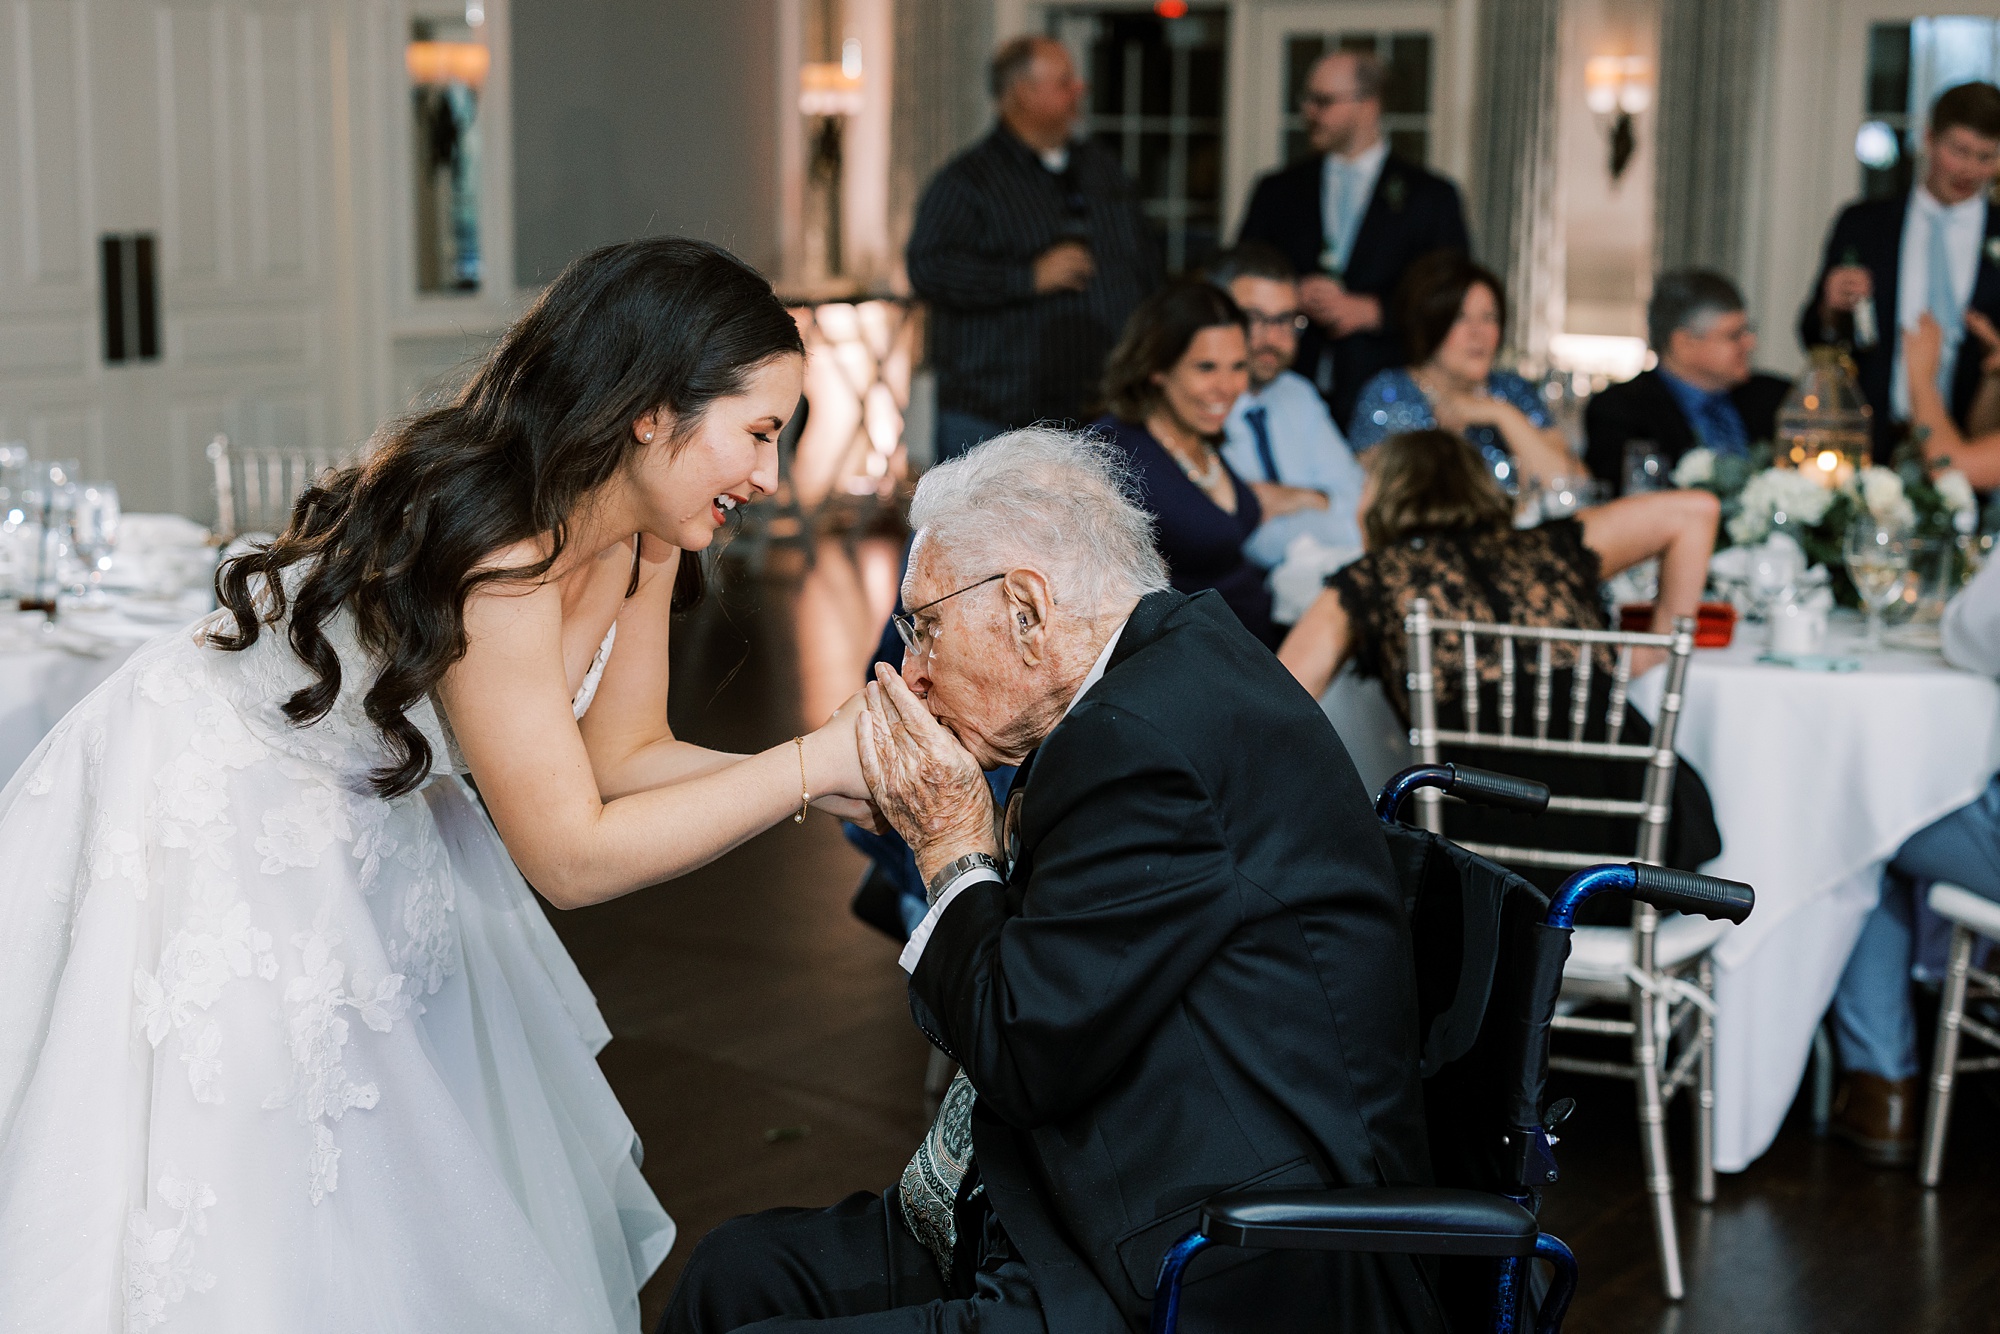 grandfather kisses bride's hand during dance at Chester County PA wedding reception